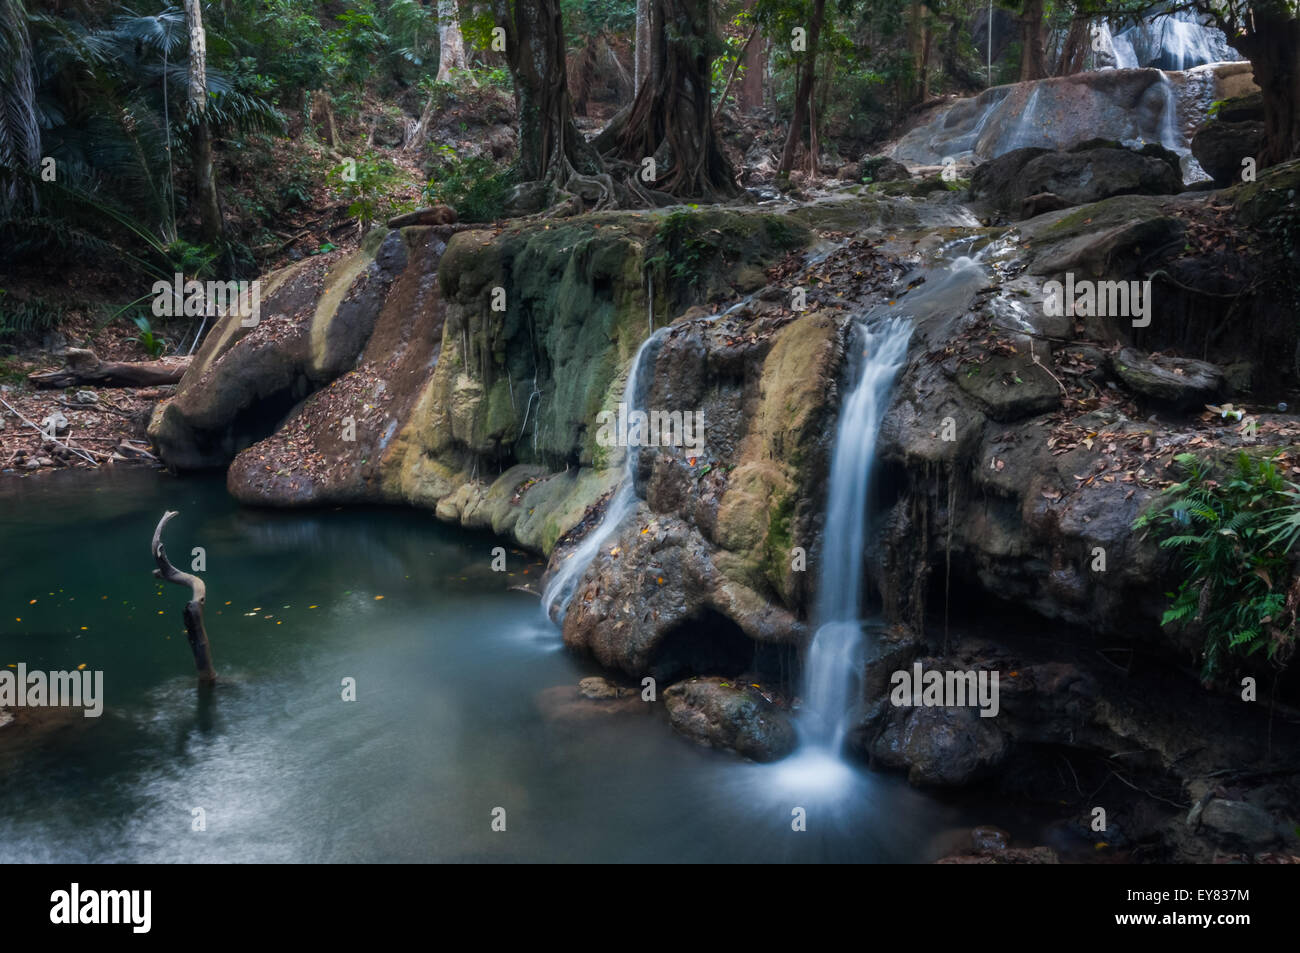 Waterfalls surrounded by forest in Oenesu near Kupang, East Nusa Tenggara, Indonesia. Stock Photo